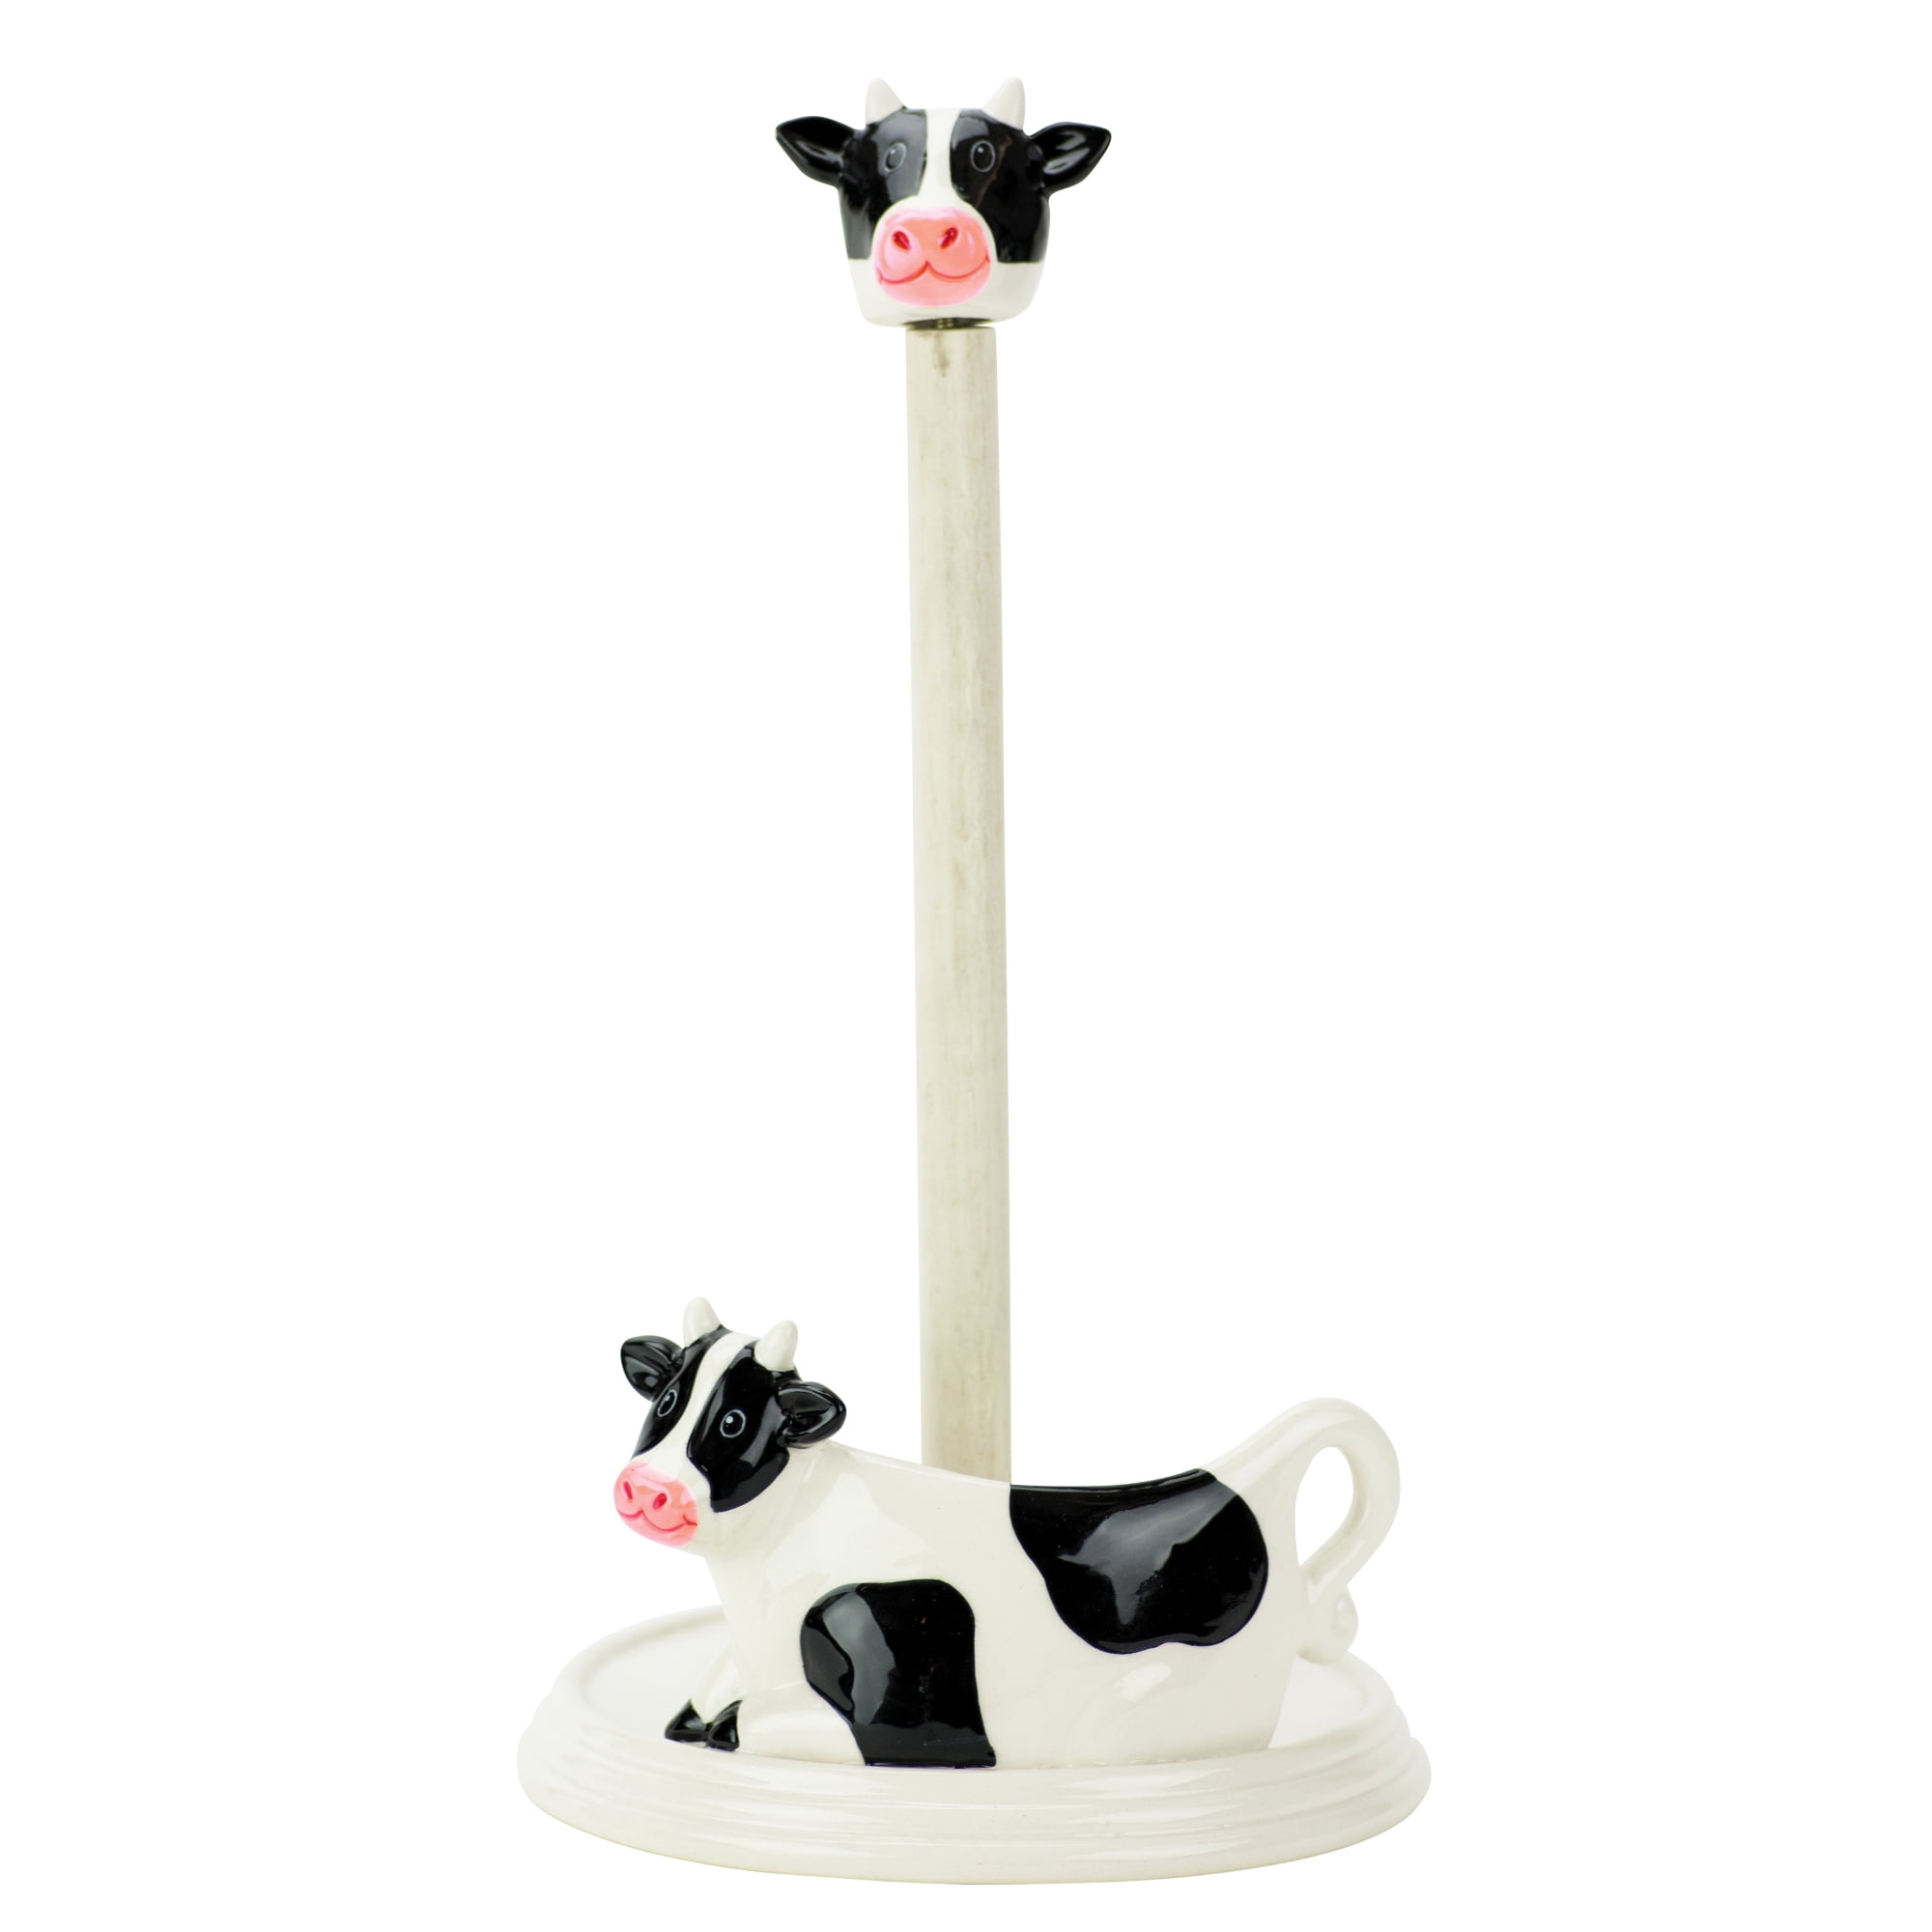 13.5 Inch High Farm Cow Cast Iron Paper Towel Holder Stand Home Decor